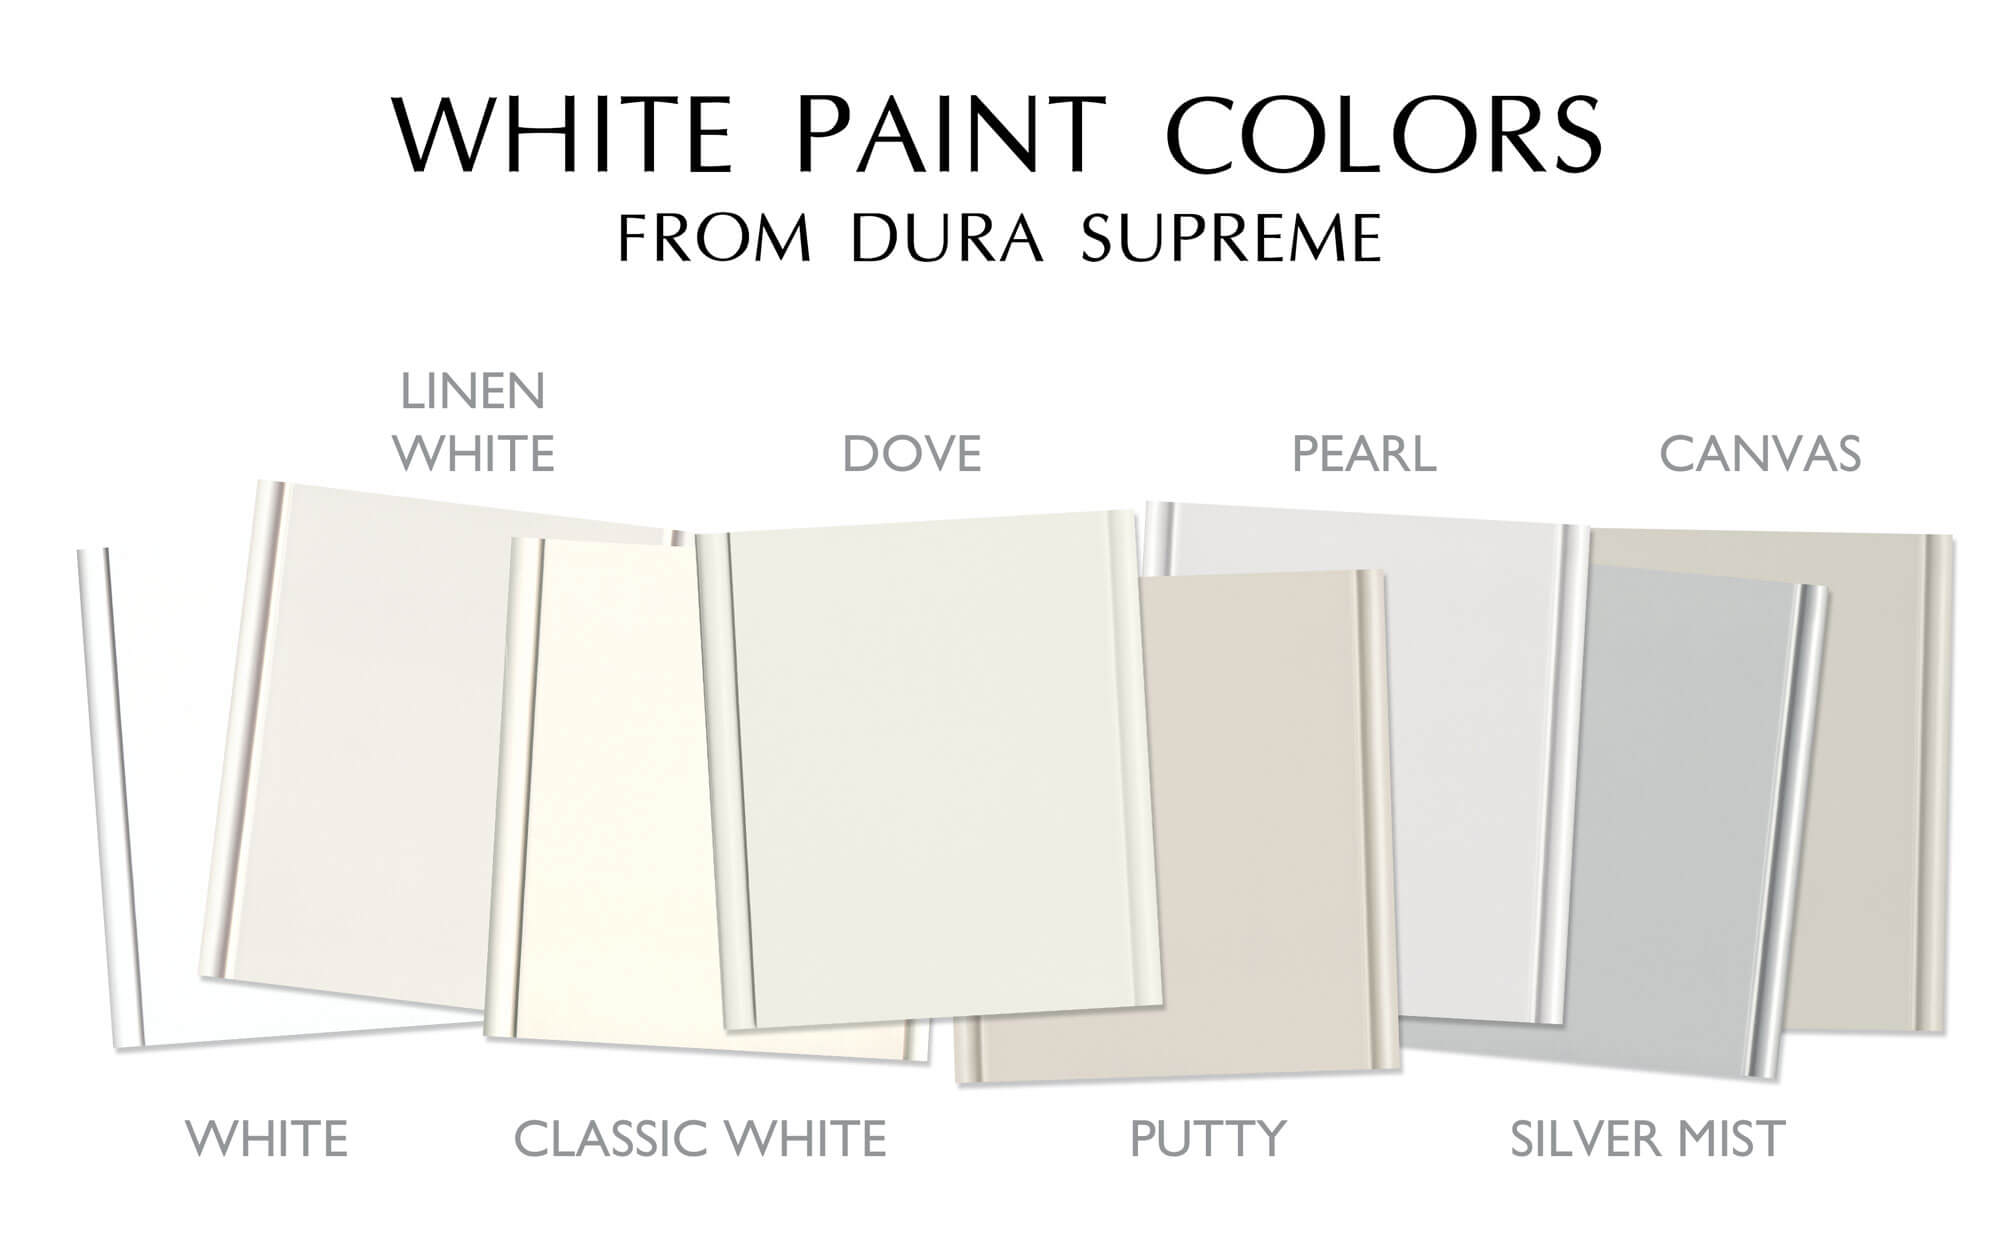 White Paint Finish Colors for Kitchen Cabinets from Dura Supreme Cabinetry. White, Linen White, Classic White, Dove, Putty, Pearl, Silver Mist, and Canvas.